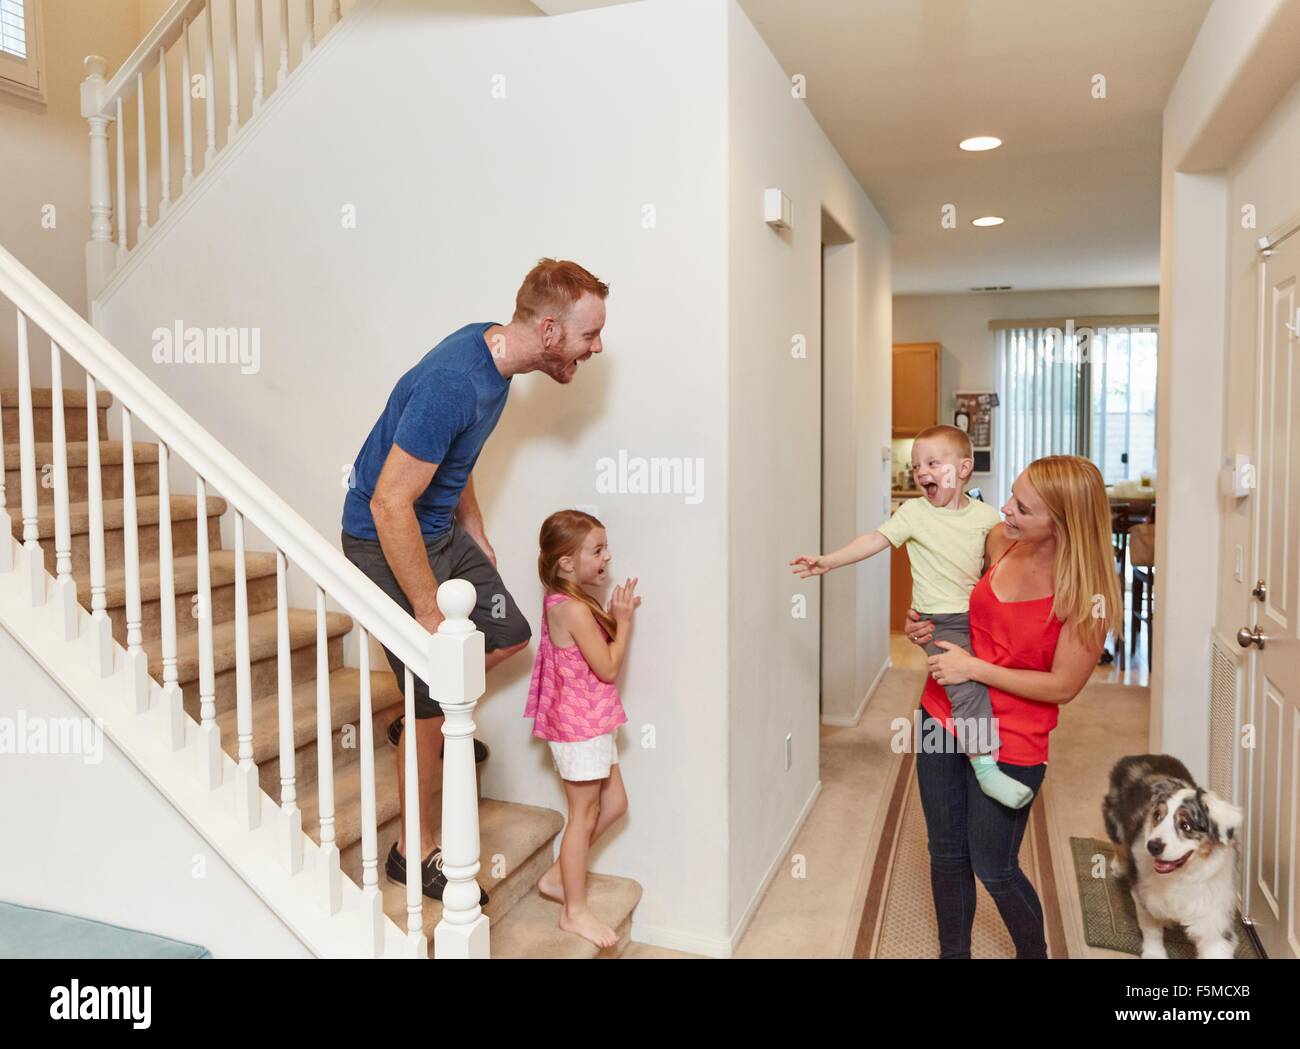 Family playing peek-a-boo on staircase at home Stock Photo